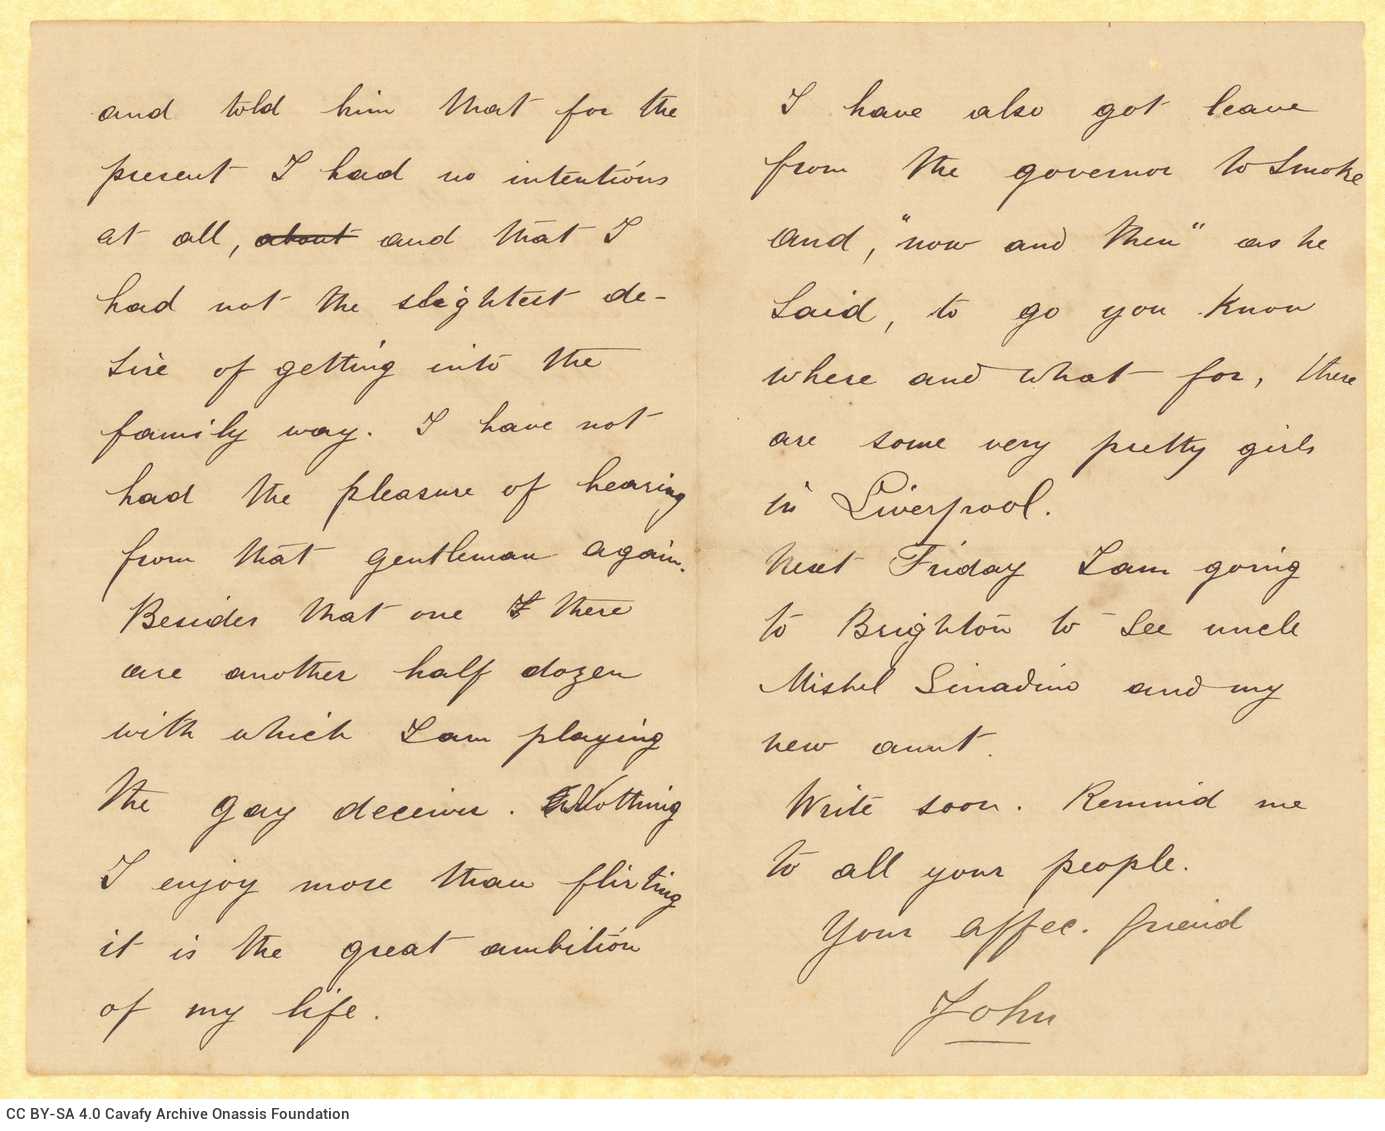 Handwritten letter by John [Rodocanachi] to Cavafy in two bifolios, with notes on all sides. Reference to the loss of Cavafy'